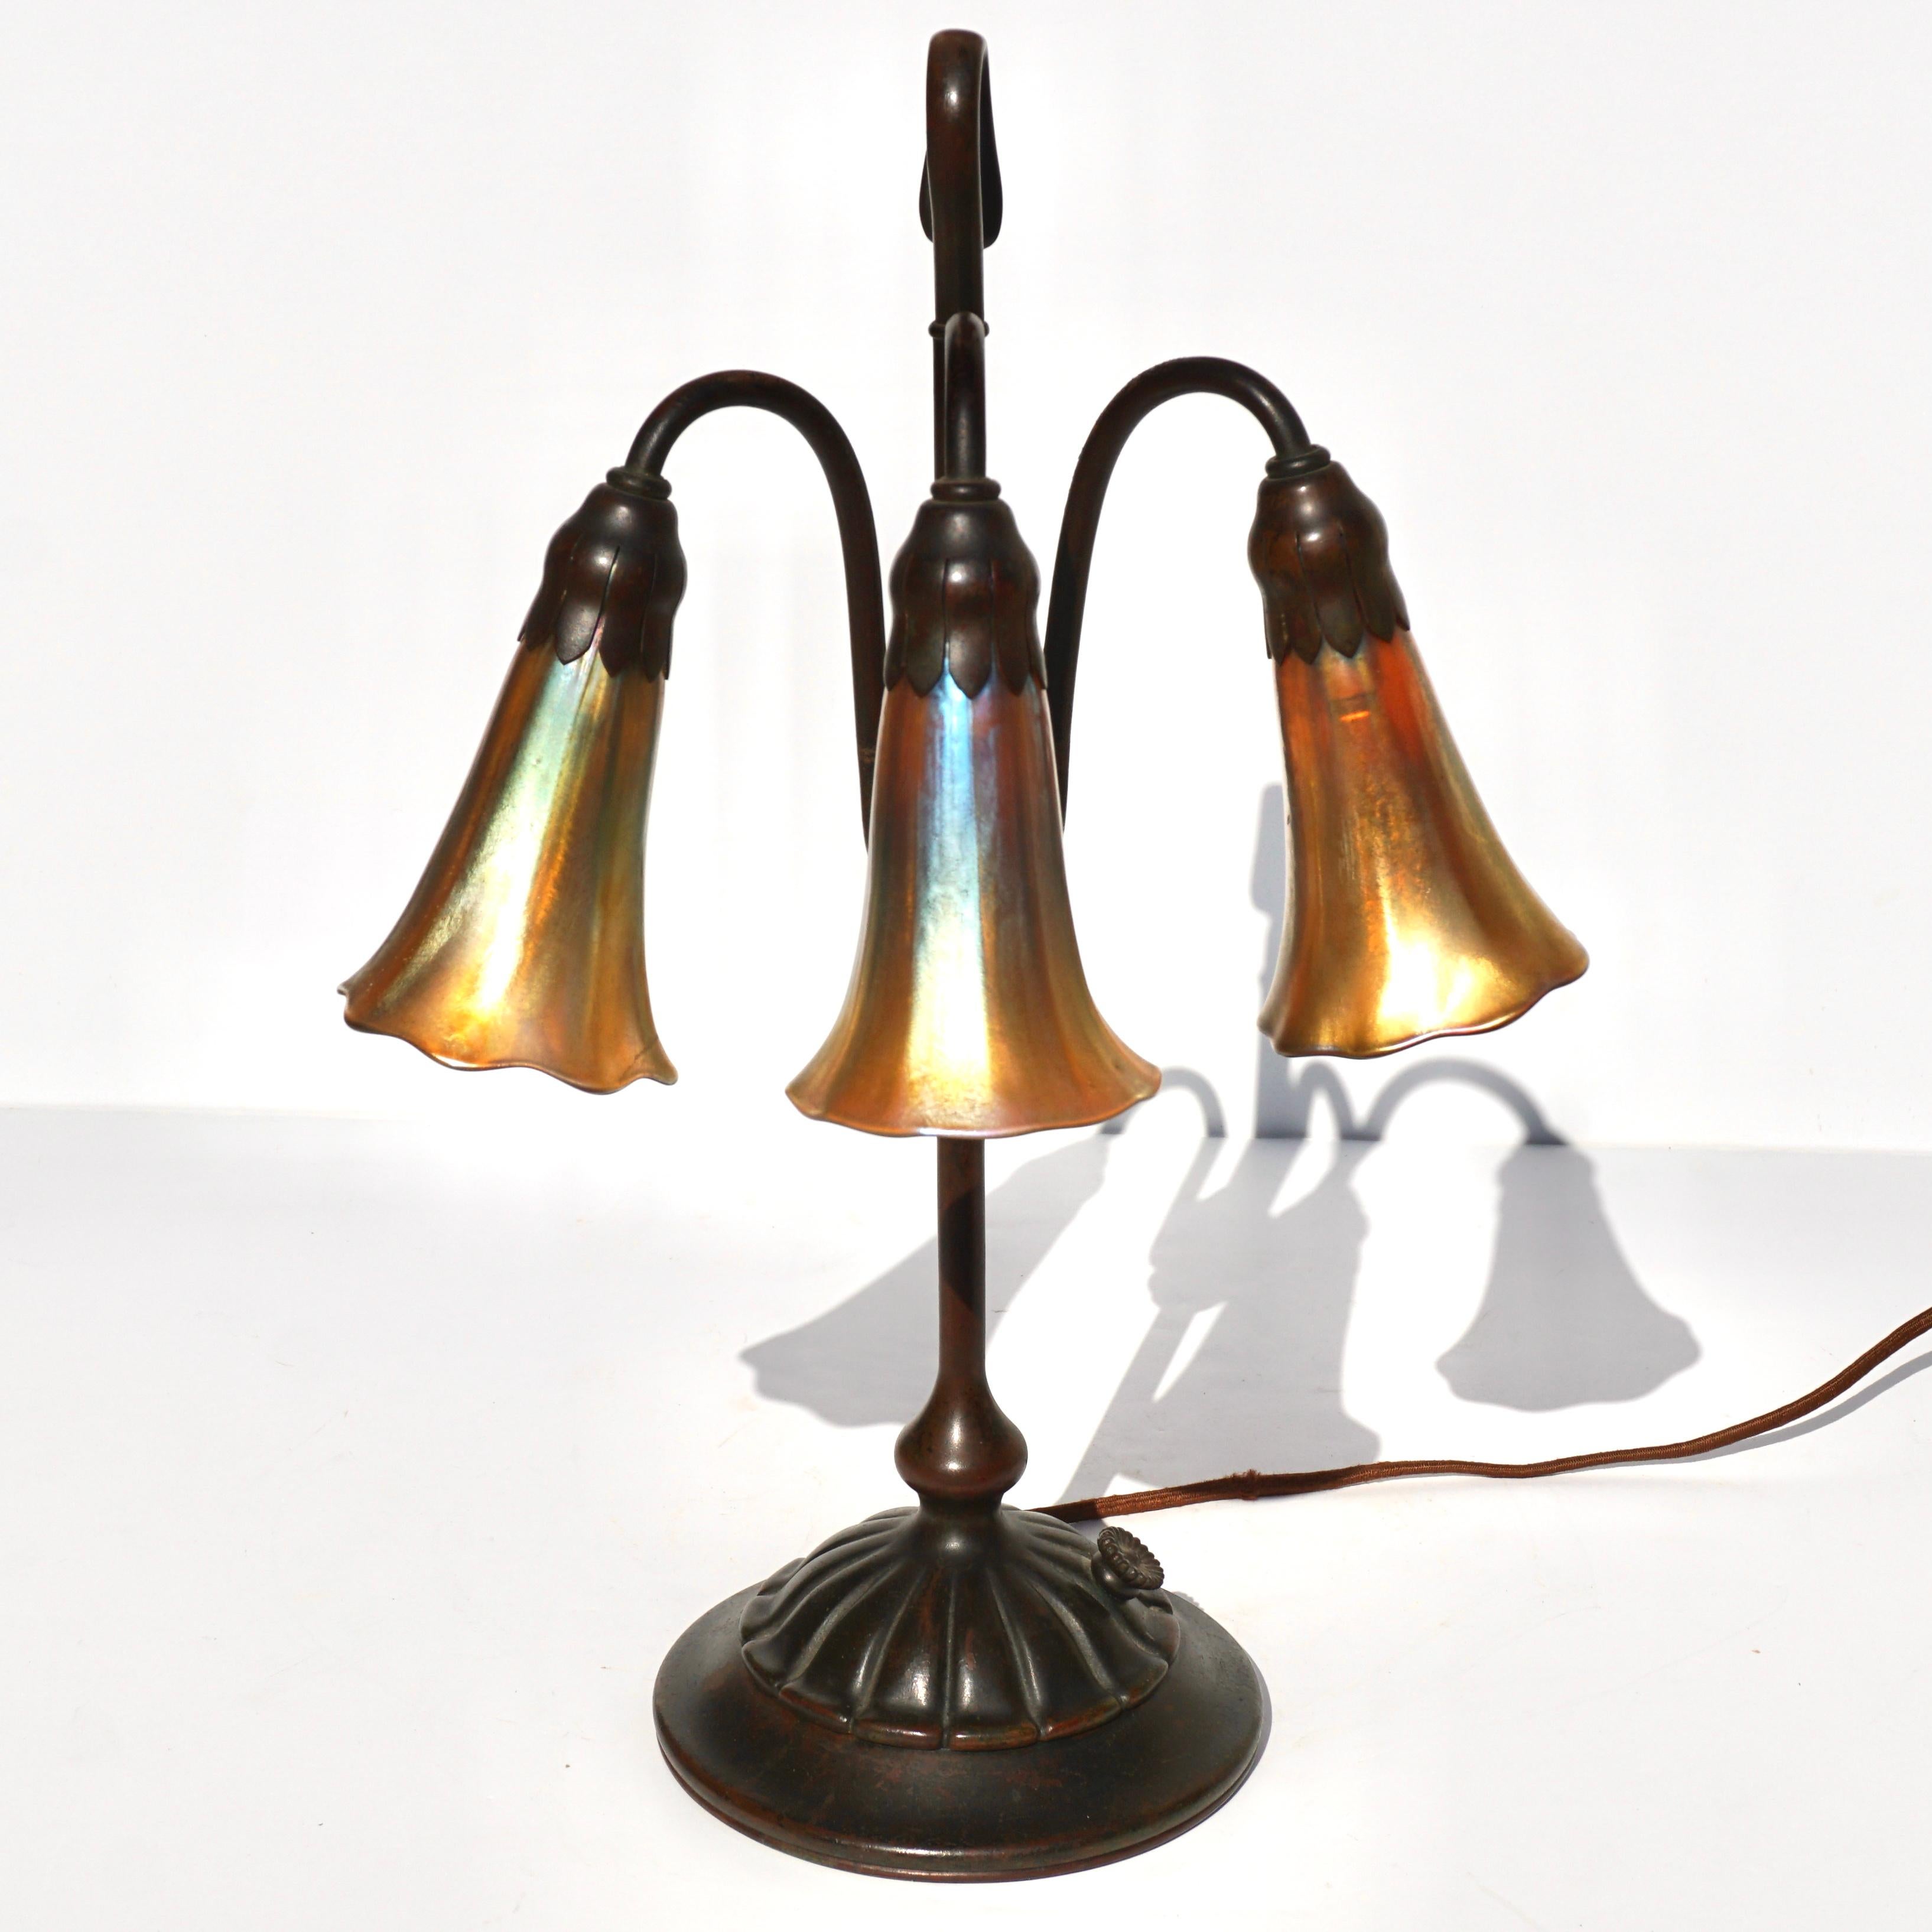 Art Nouveau Tiffany Studios Three Light Lily Bronze and Favrile Table Lamp